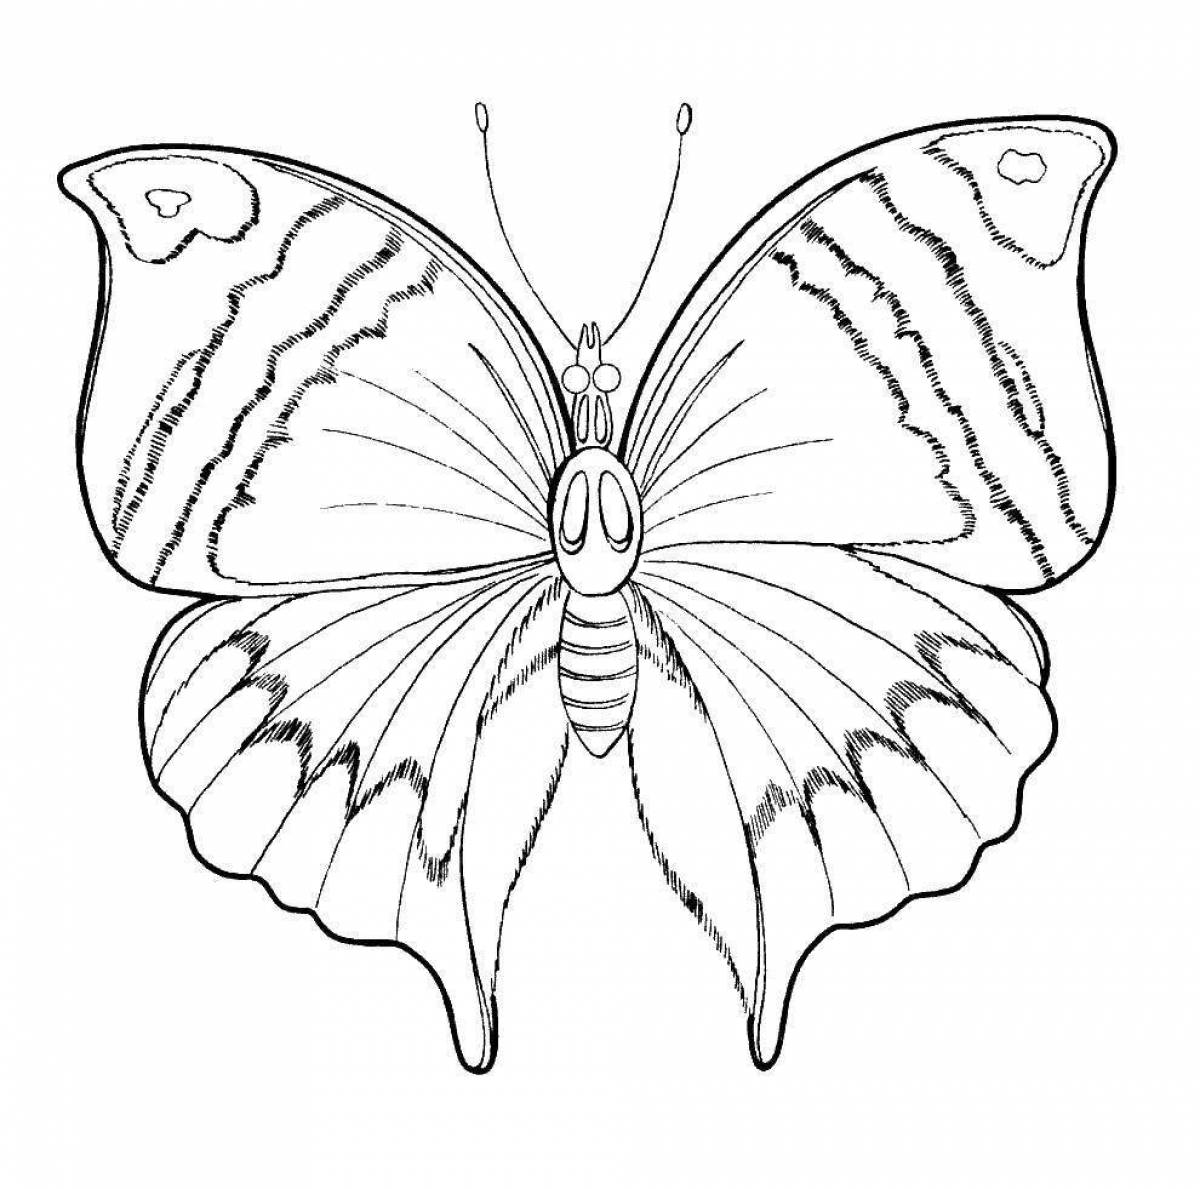 Charming peacock butterfly coloring page